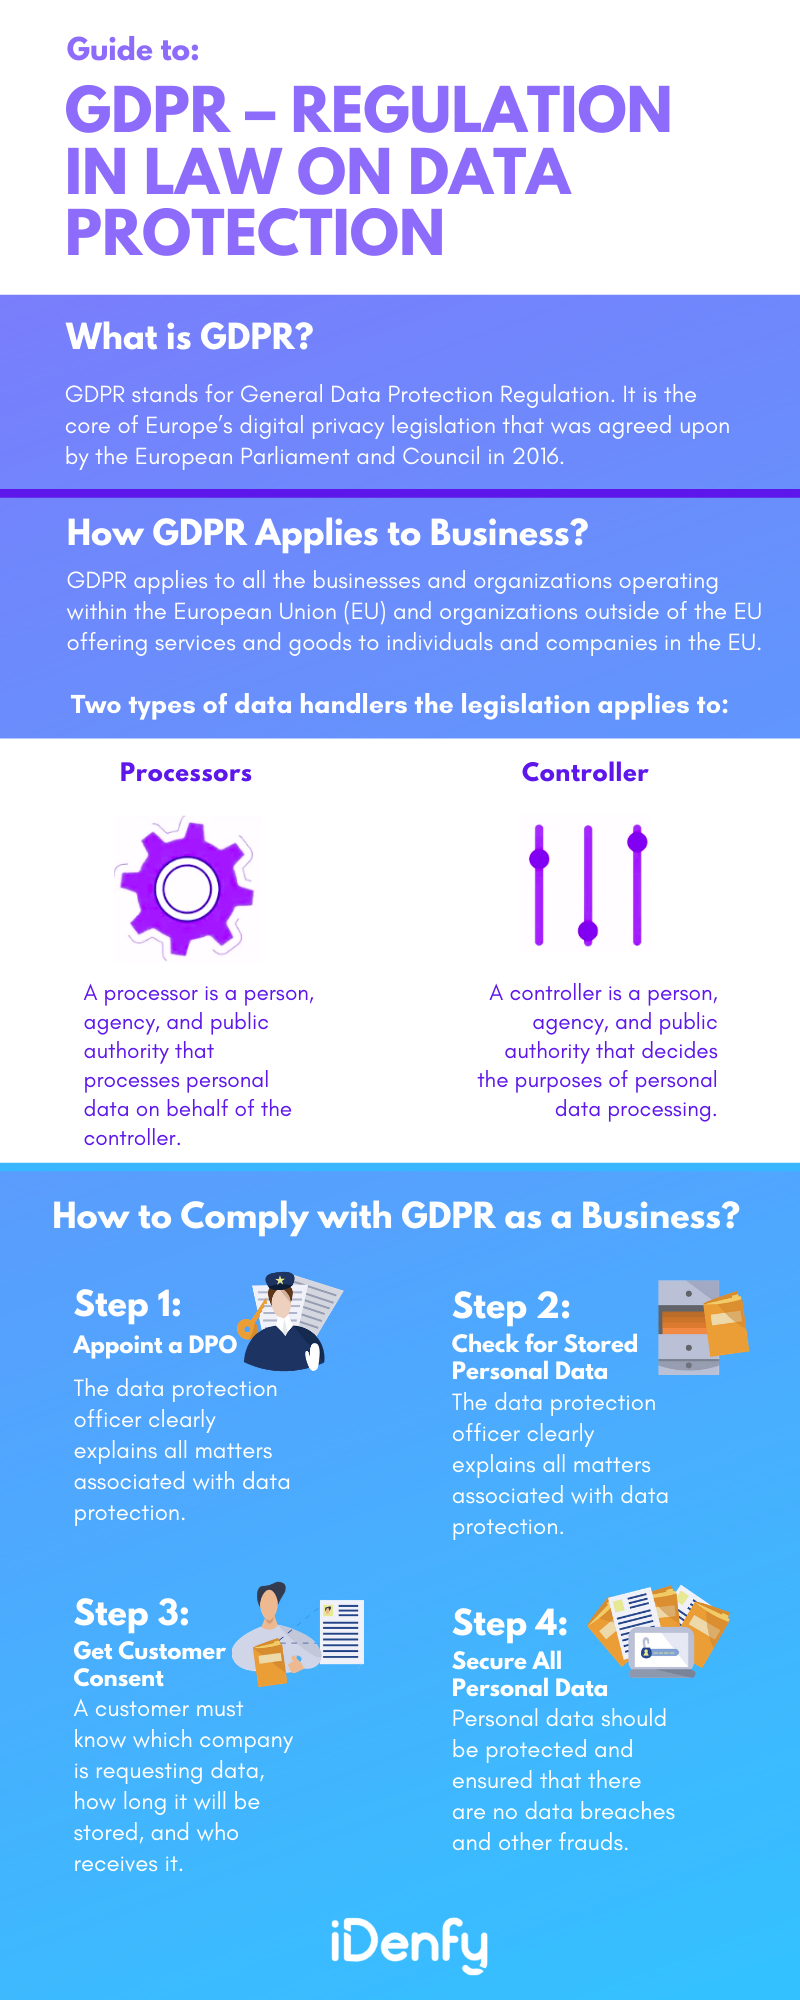 GDPR – Data Protection & Privacy in the EU_Infographic